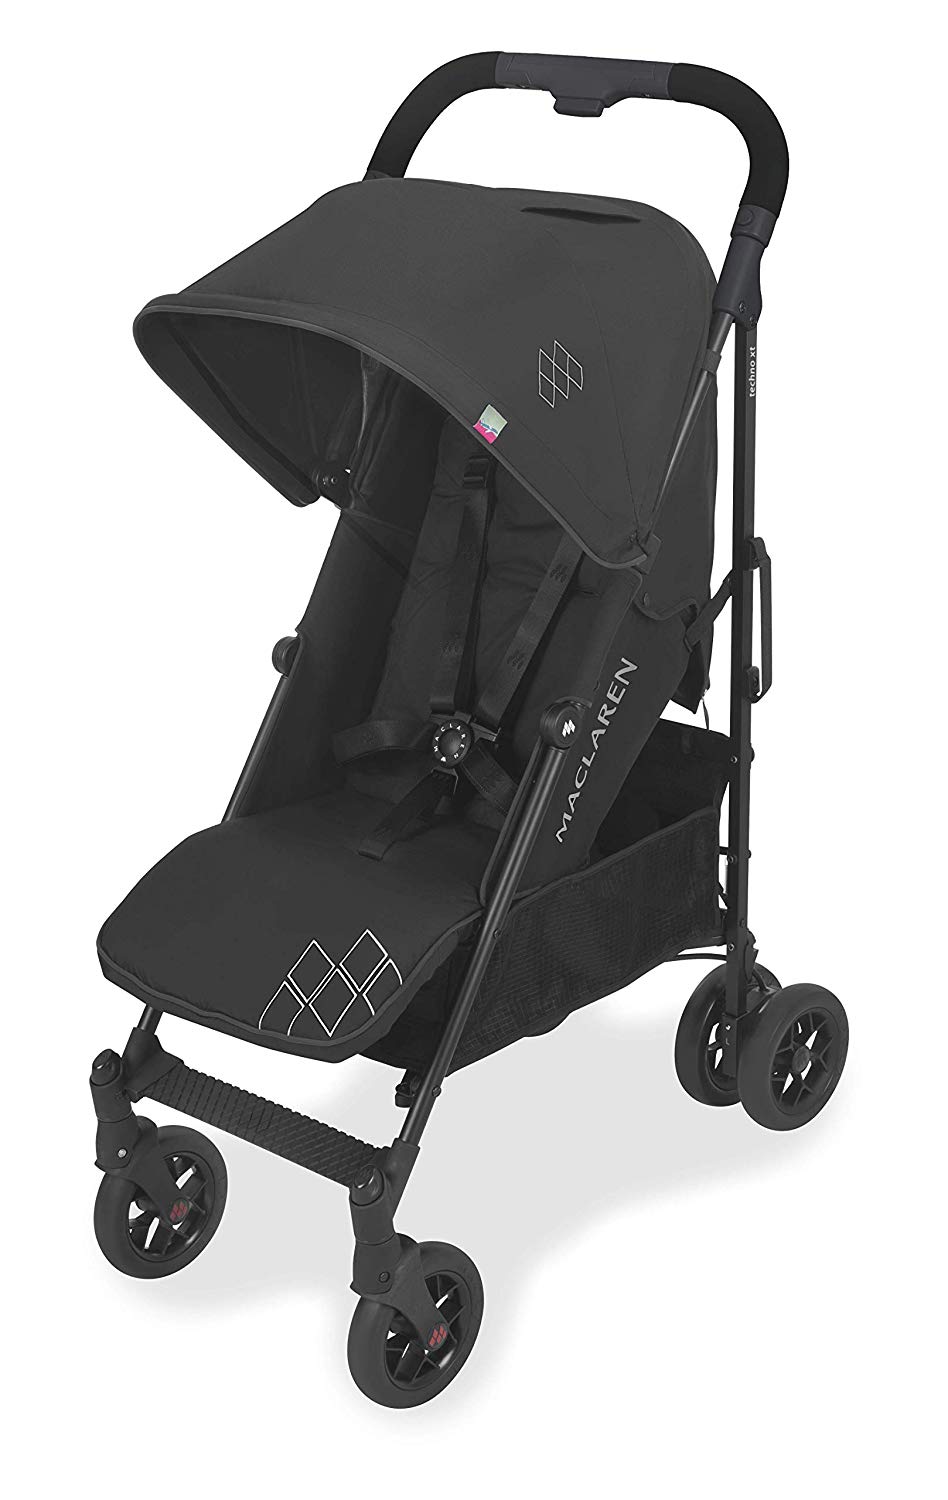 Maclaren Techno Arc Buggy – Newborns up to 25 kg, with Extendable UPF50+/Waterproof Hood, Seat with Adjustable Positions and 4 Wheel Suspension Compatible with carrycot.